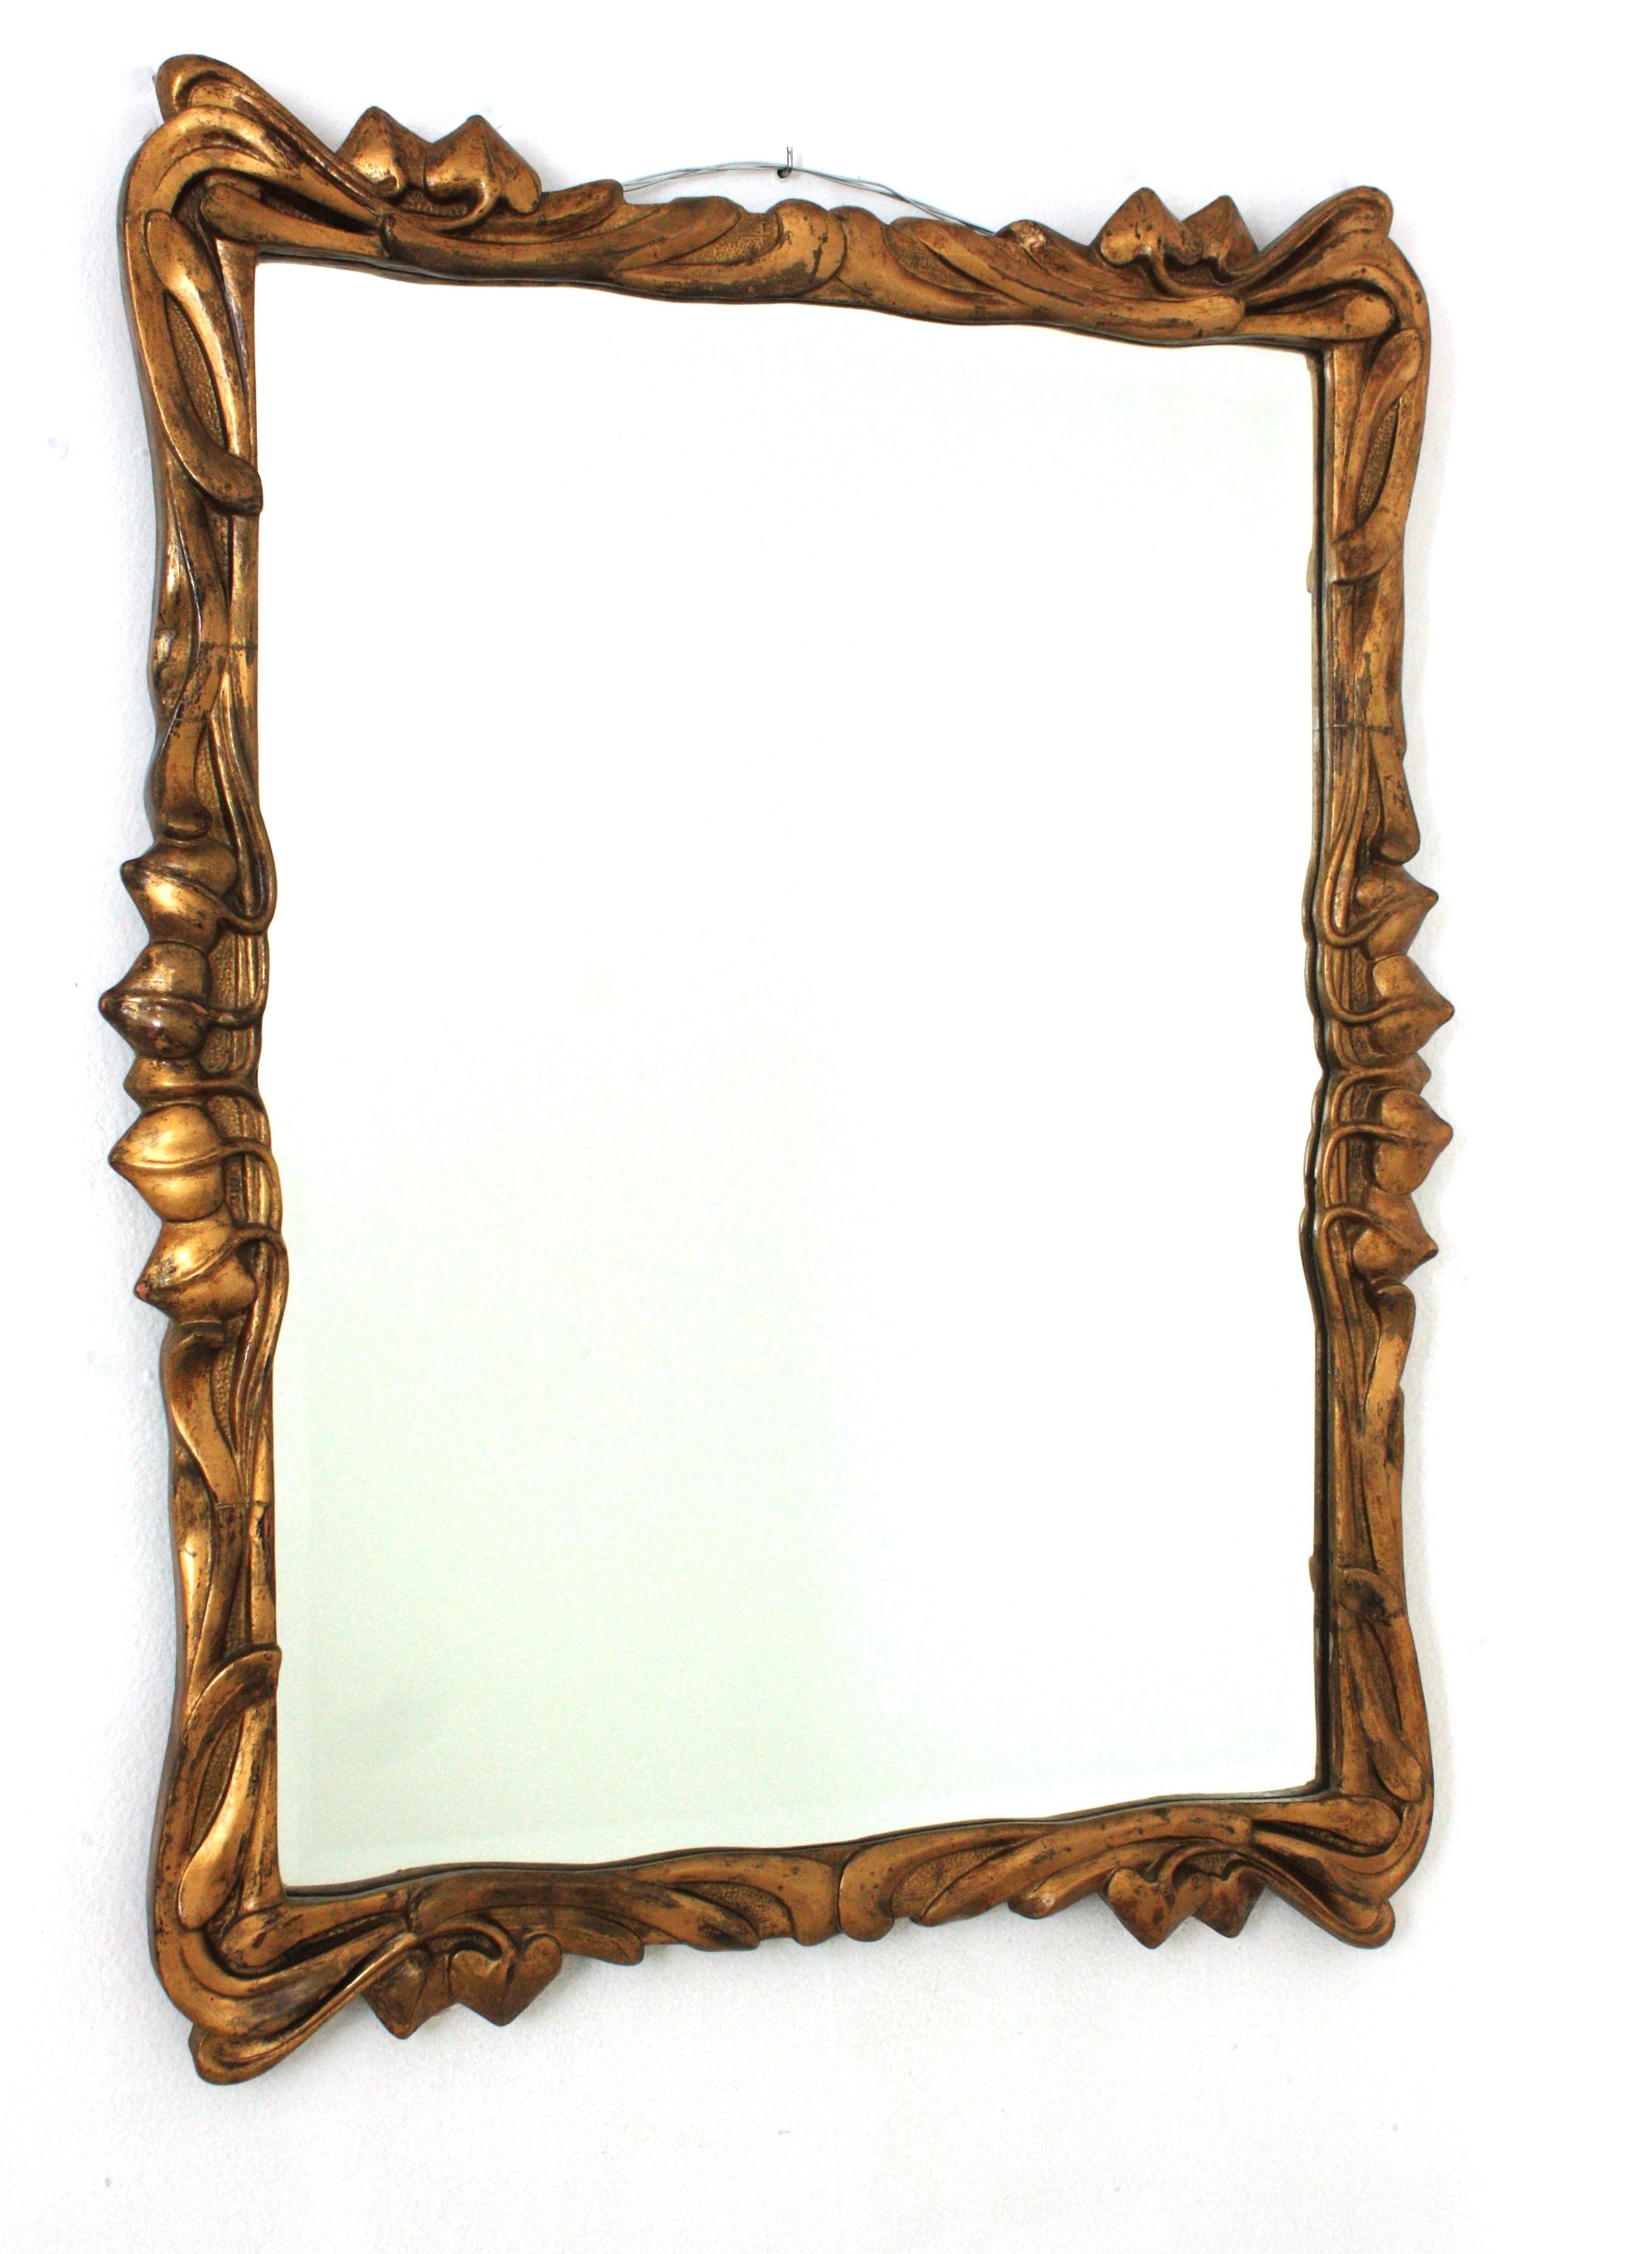 20th Century Spanish Art Nouveau Wall Mirror in Giltwood For Sale